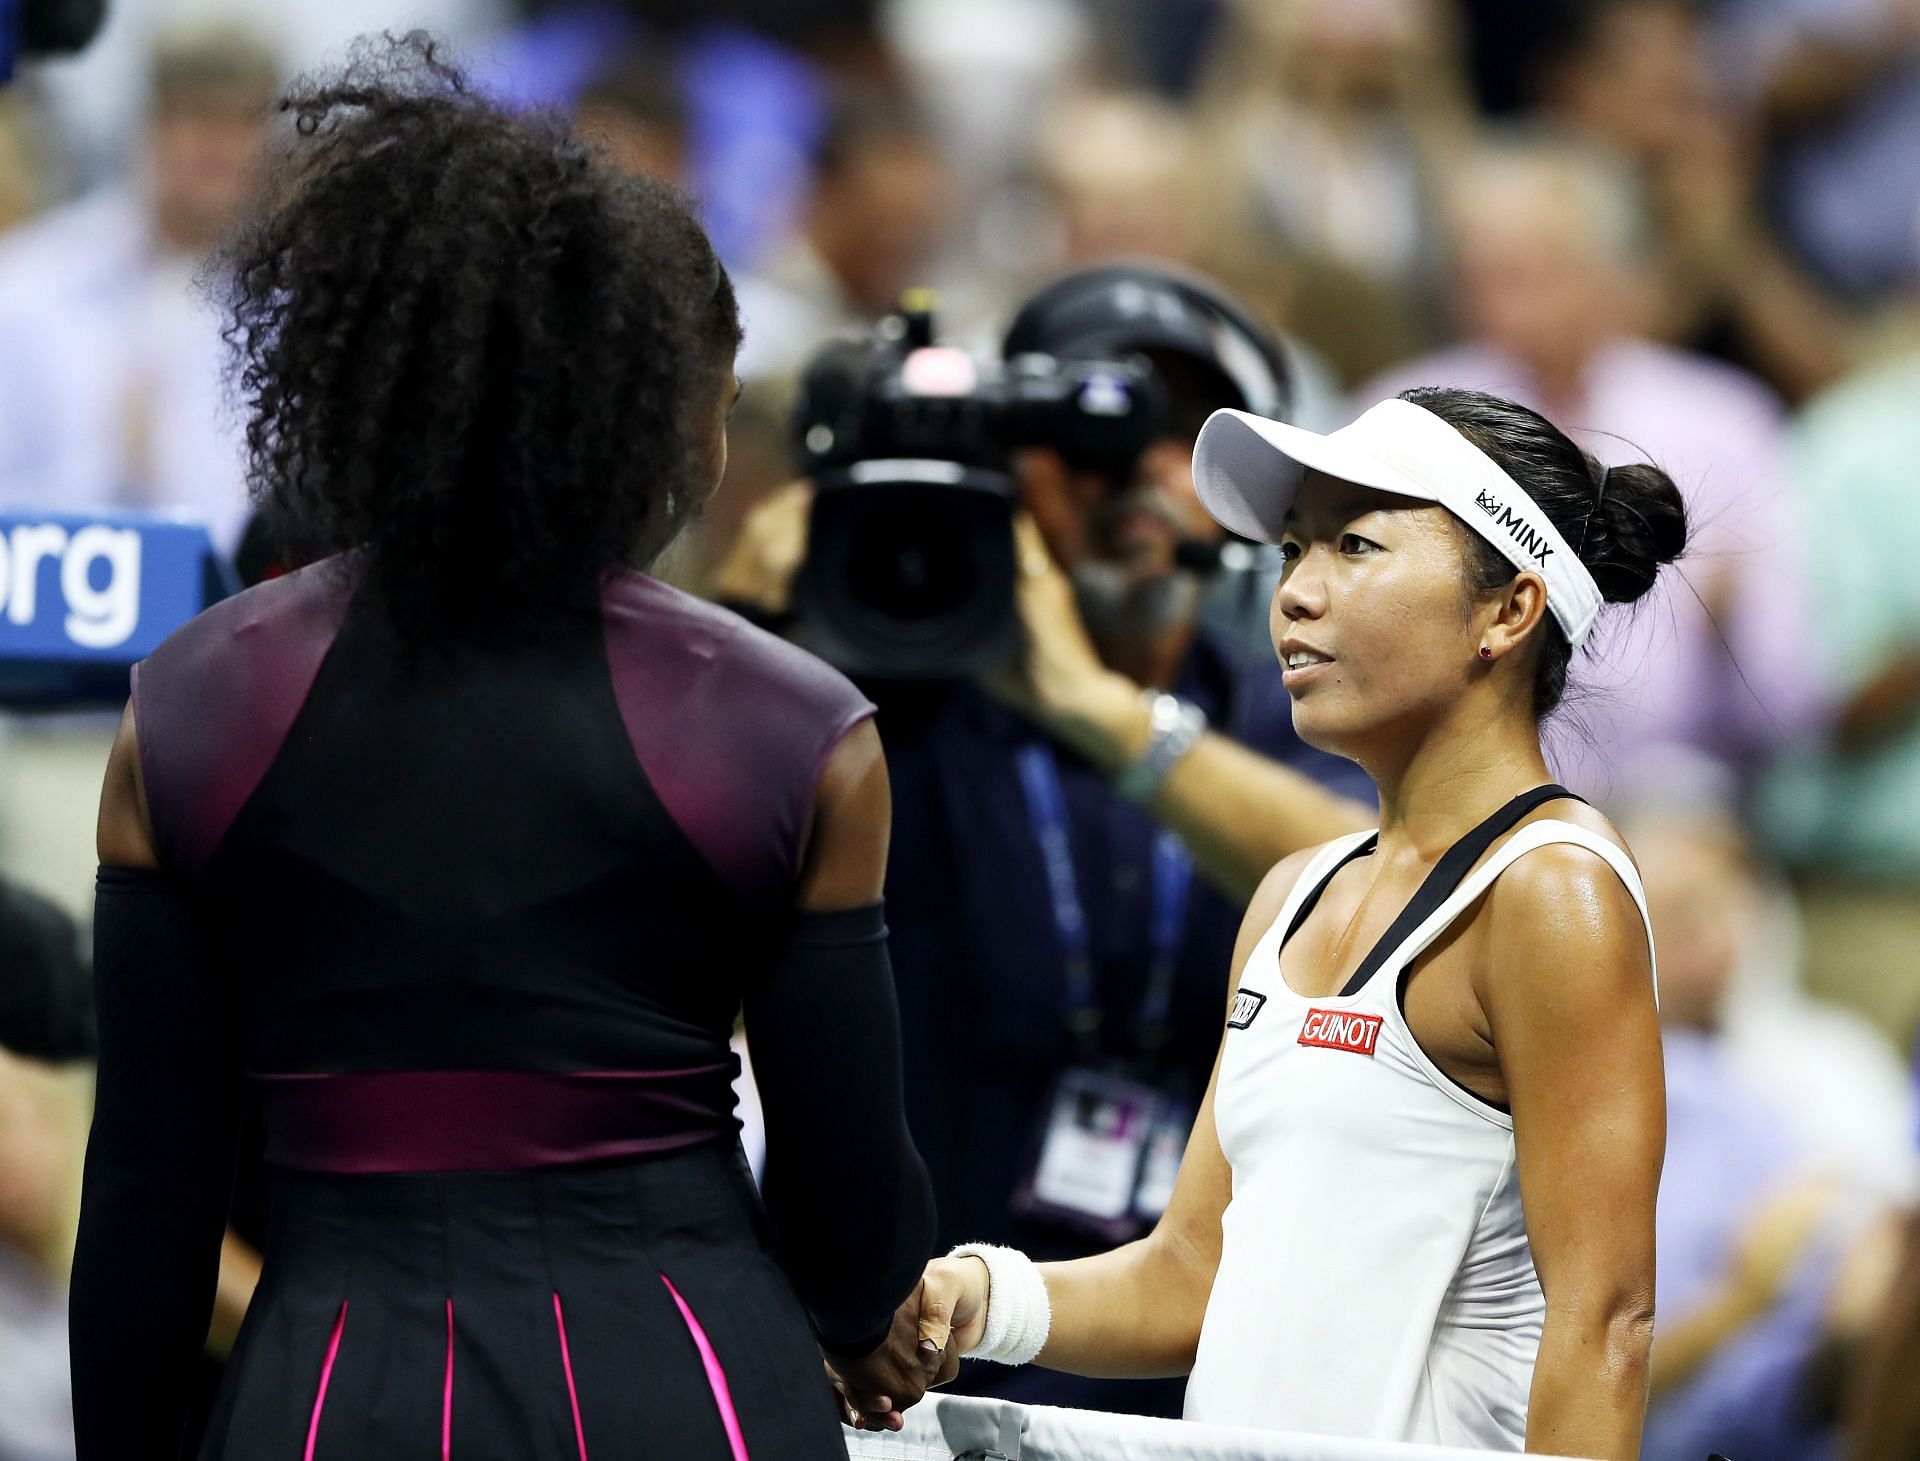 Serena Williams and Vania King (R) at the 2016 US Open